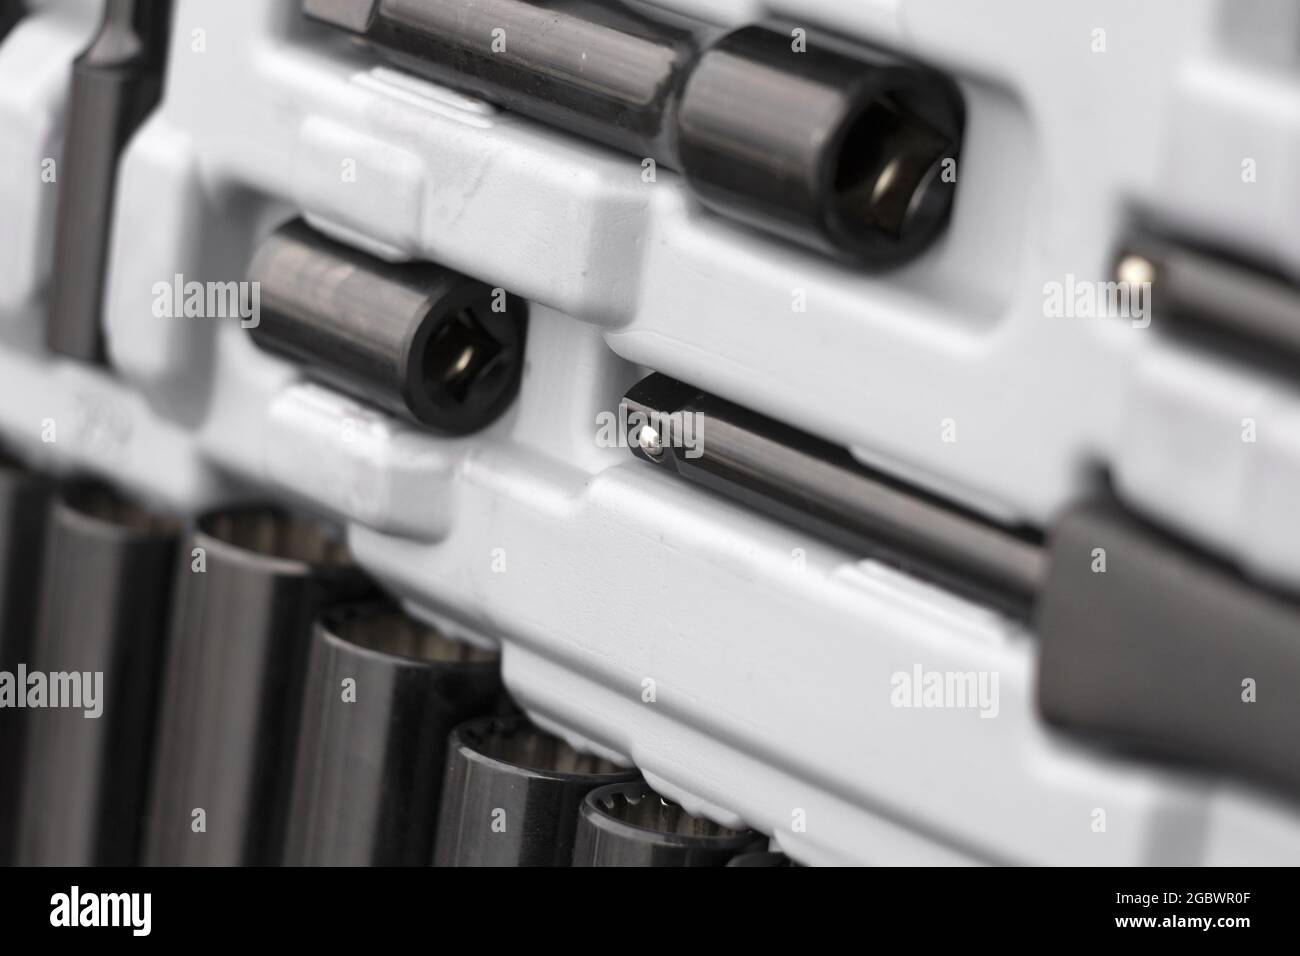 Closeup shot of sockets in a toolset Stock Photo